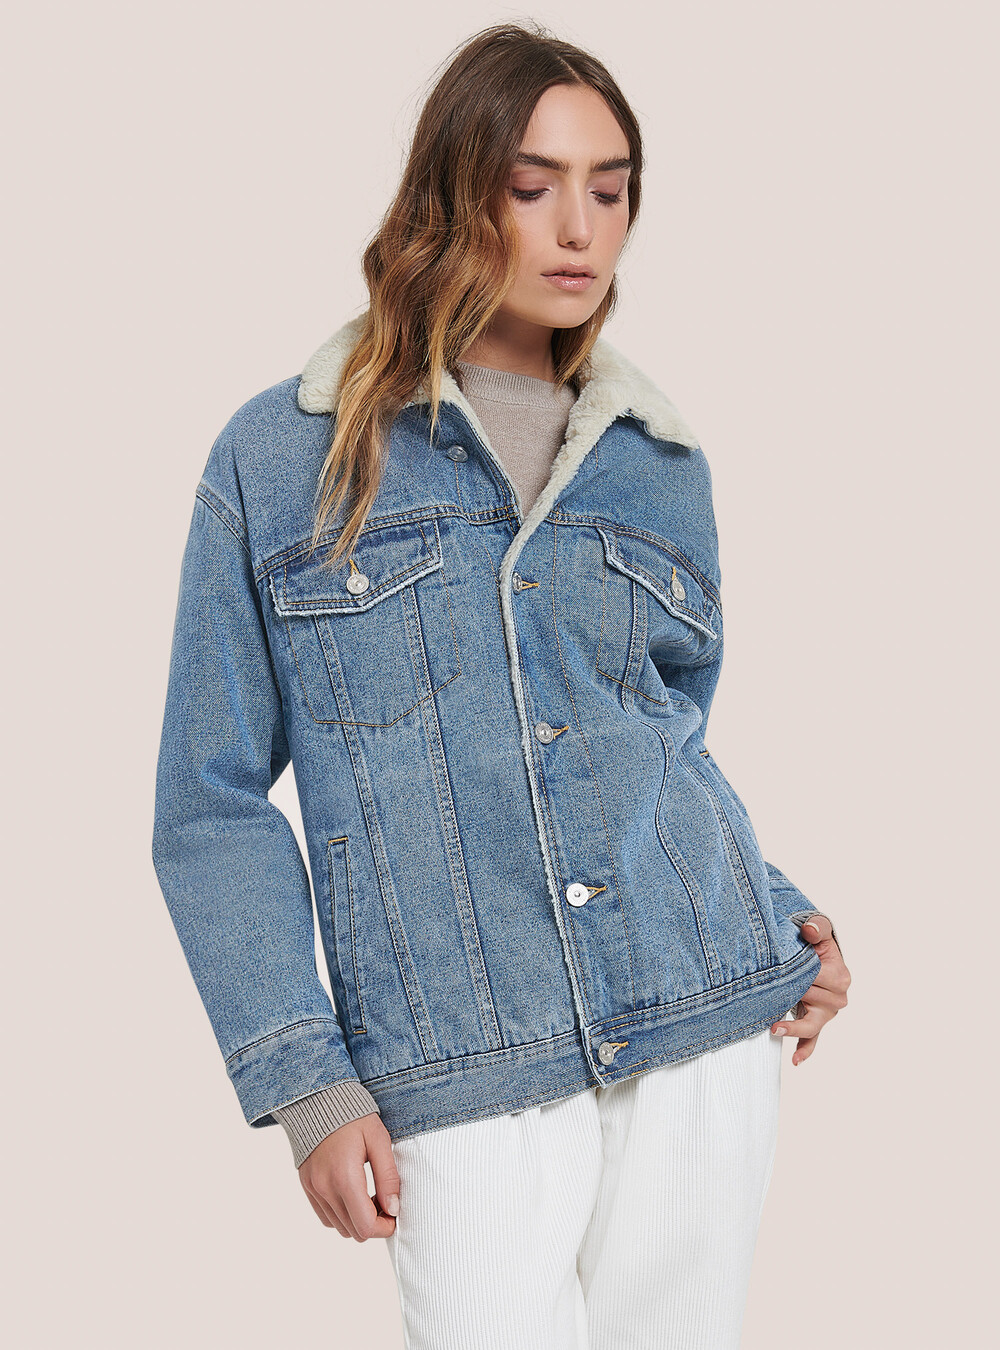 Denim jacket with faux fur lining and collar, Alcott